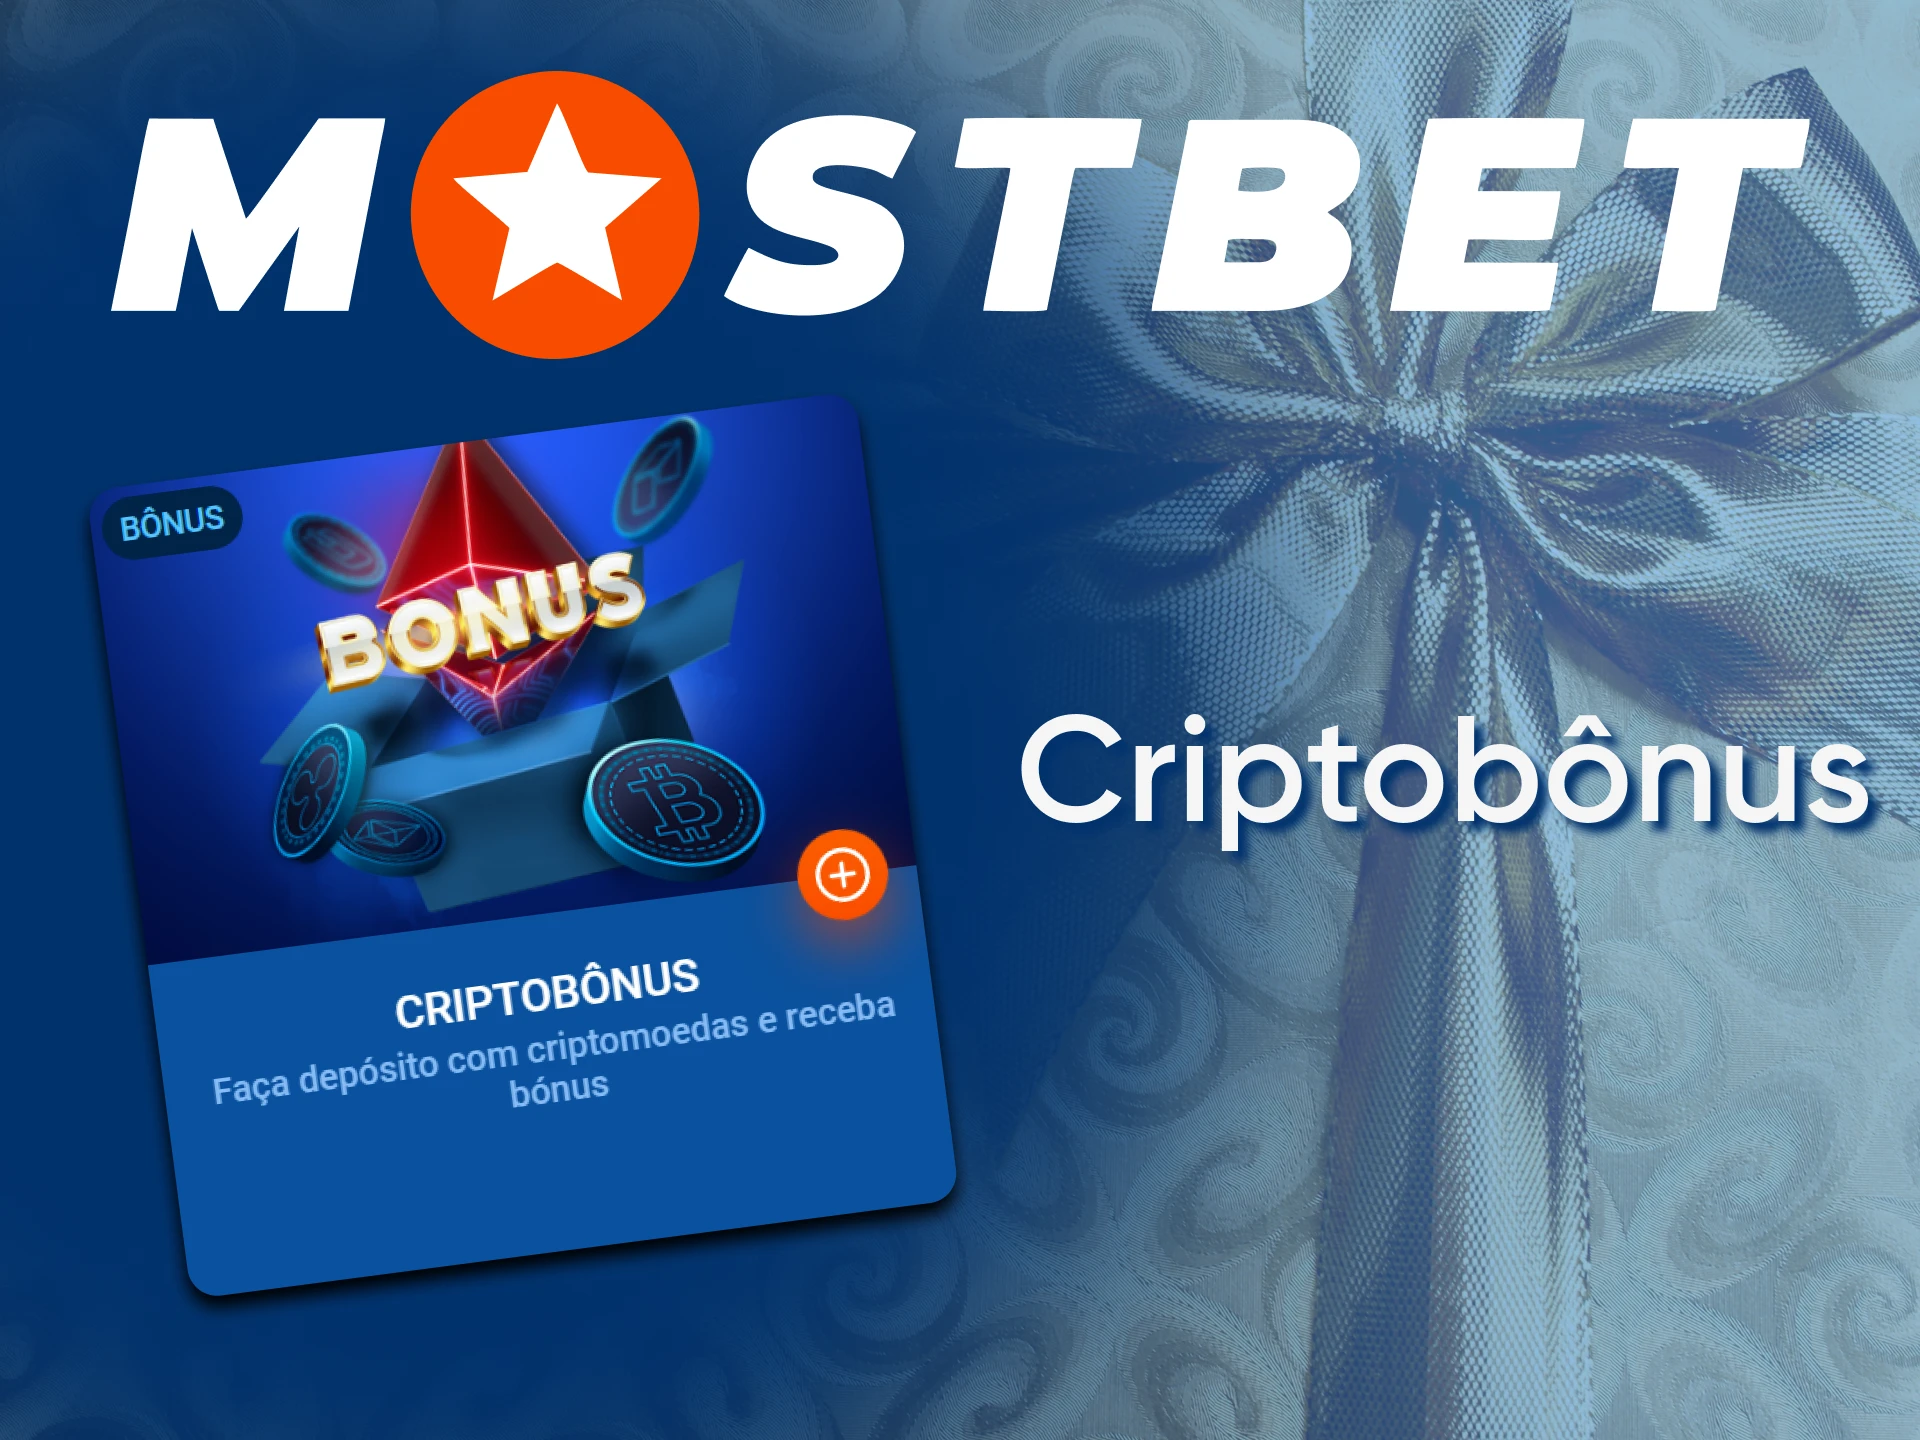 Receive a bonus when depositing cryptocurrency into your account.